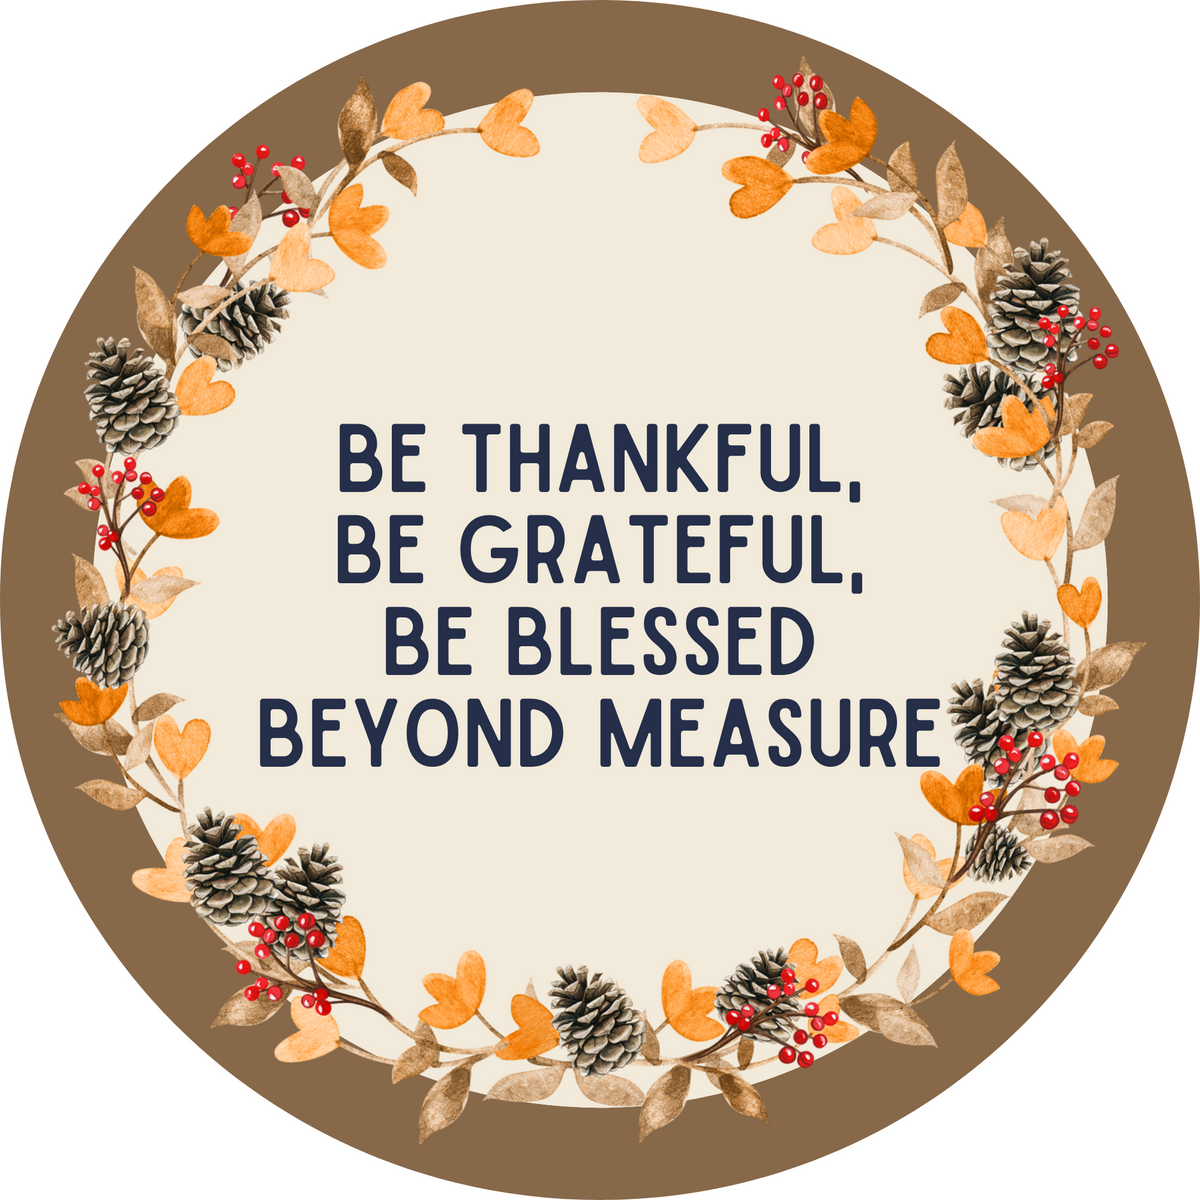 Be thankful, be grateful, be blessed beyond measure wreath sign